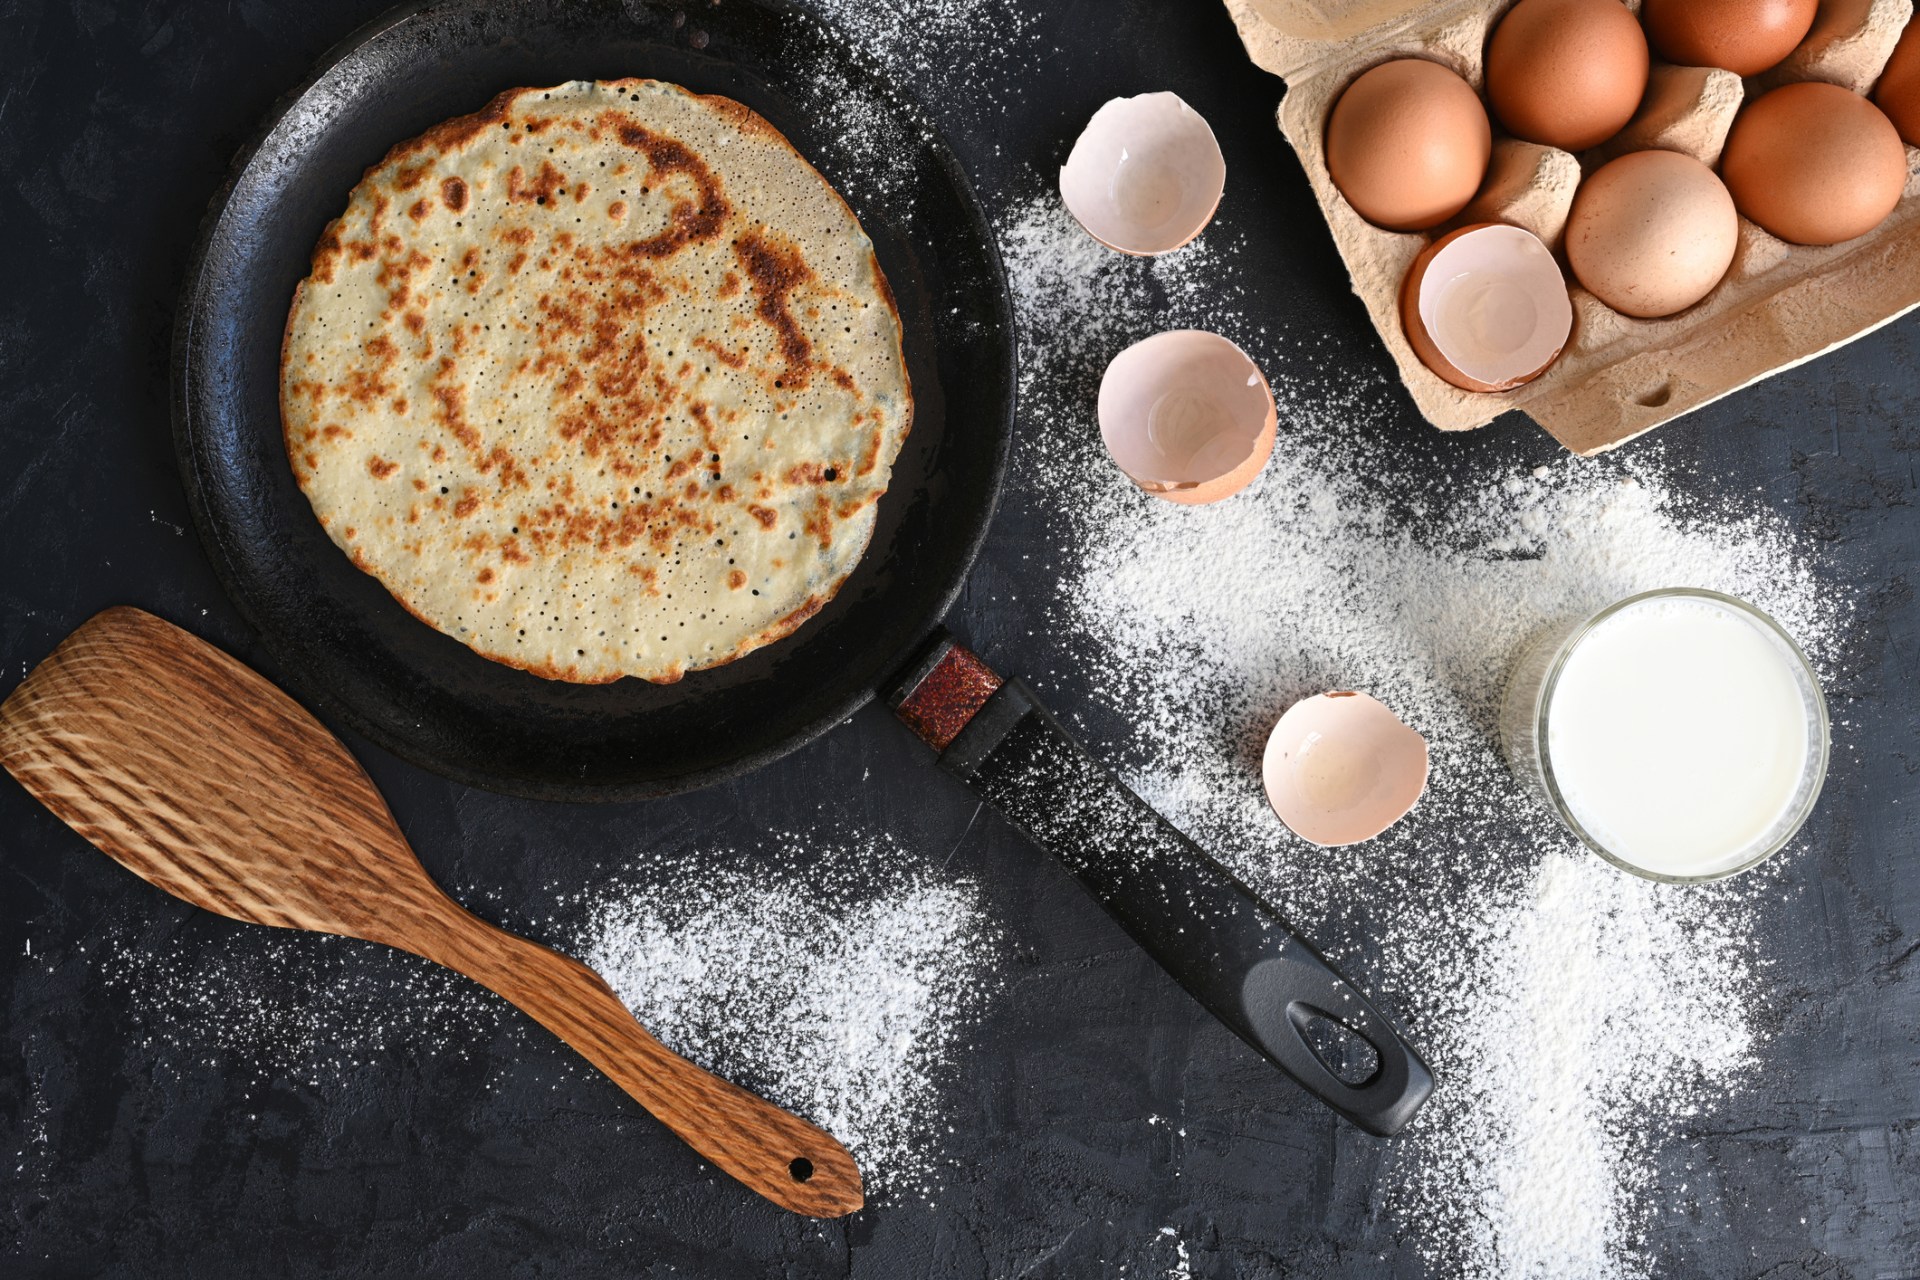 how to, how to make the perfect pancake, according to science